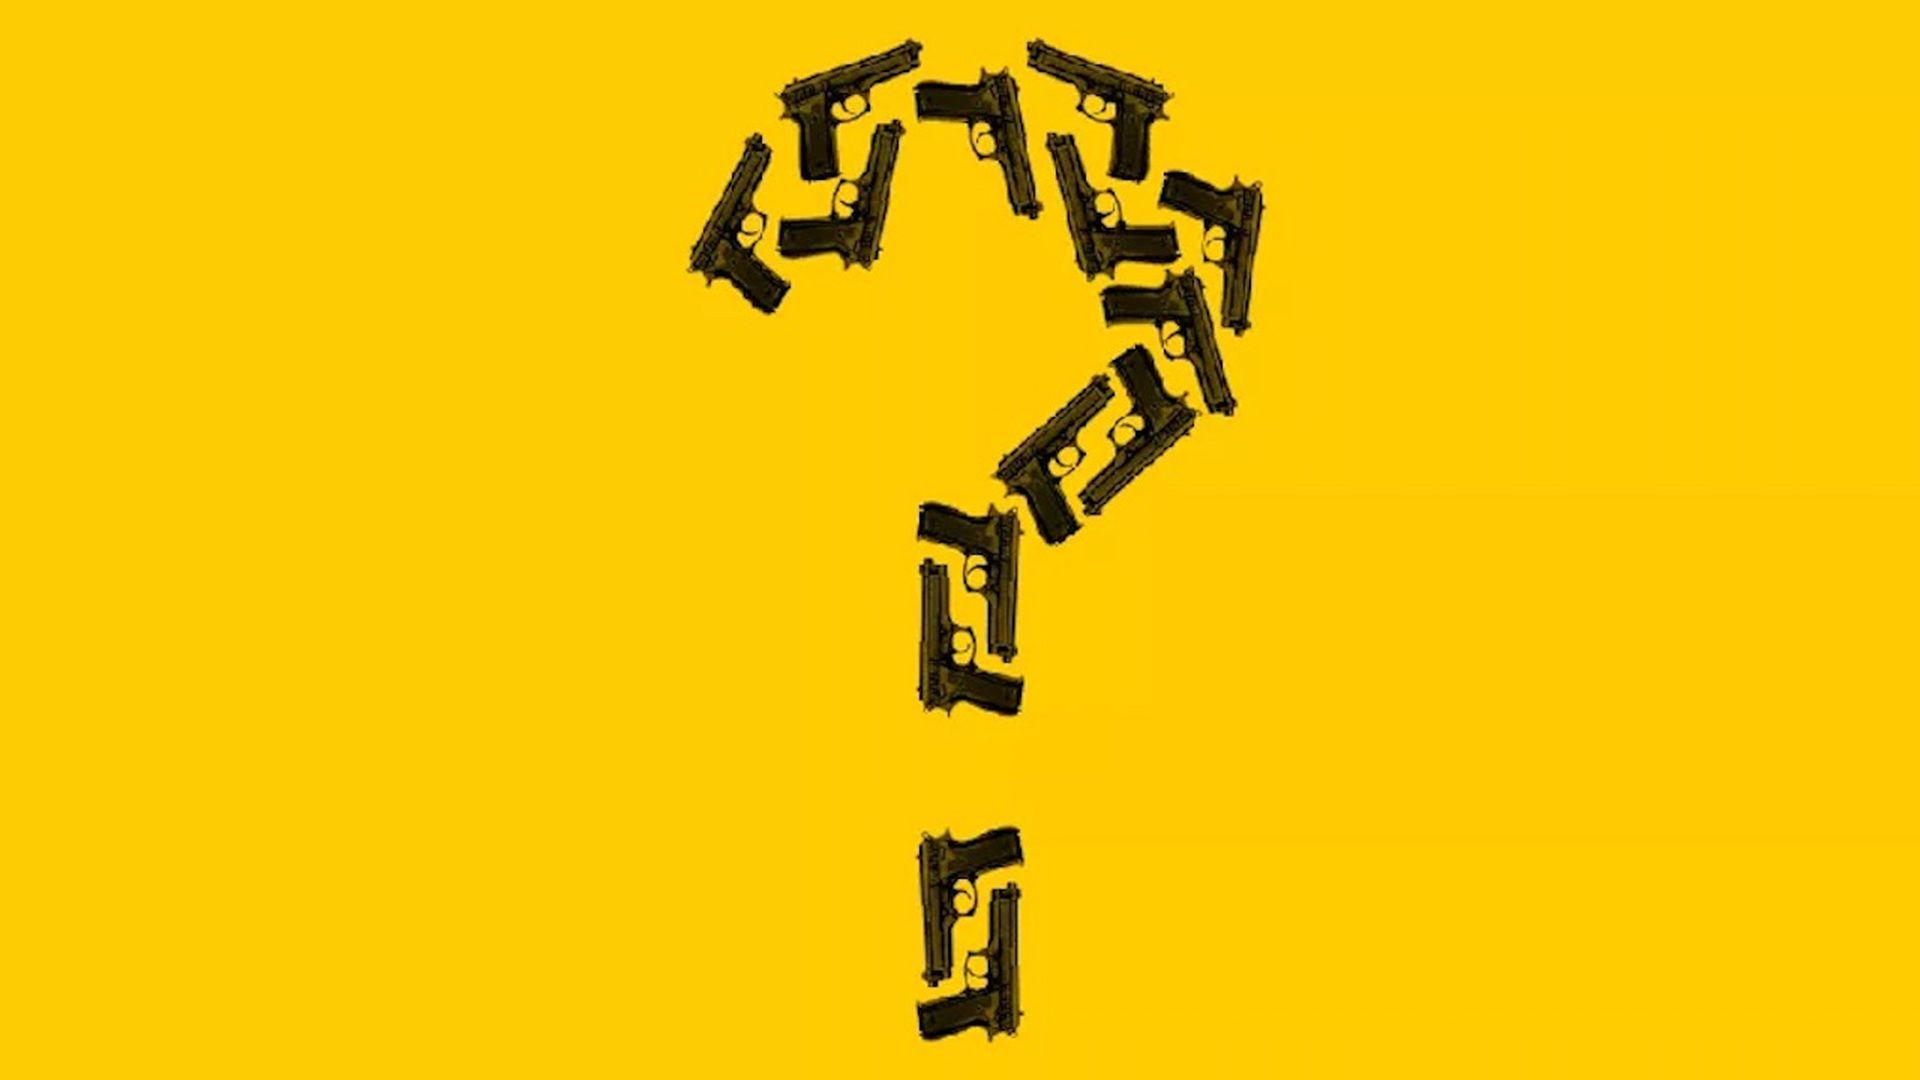 Illustration of a question mark made out of guns. 